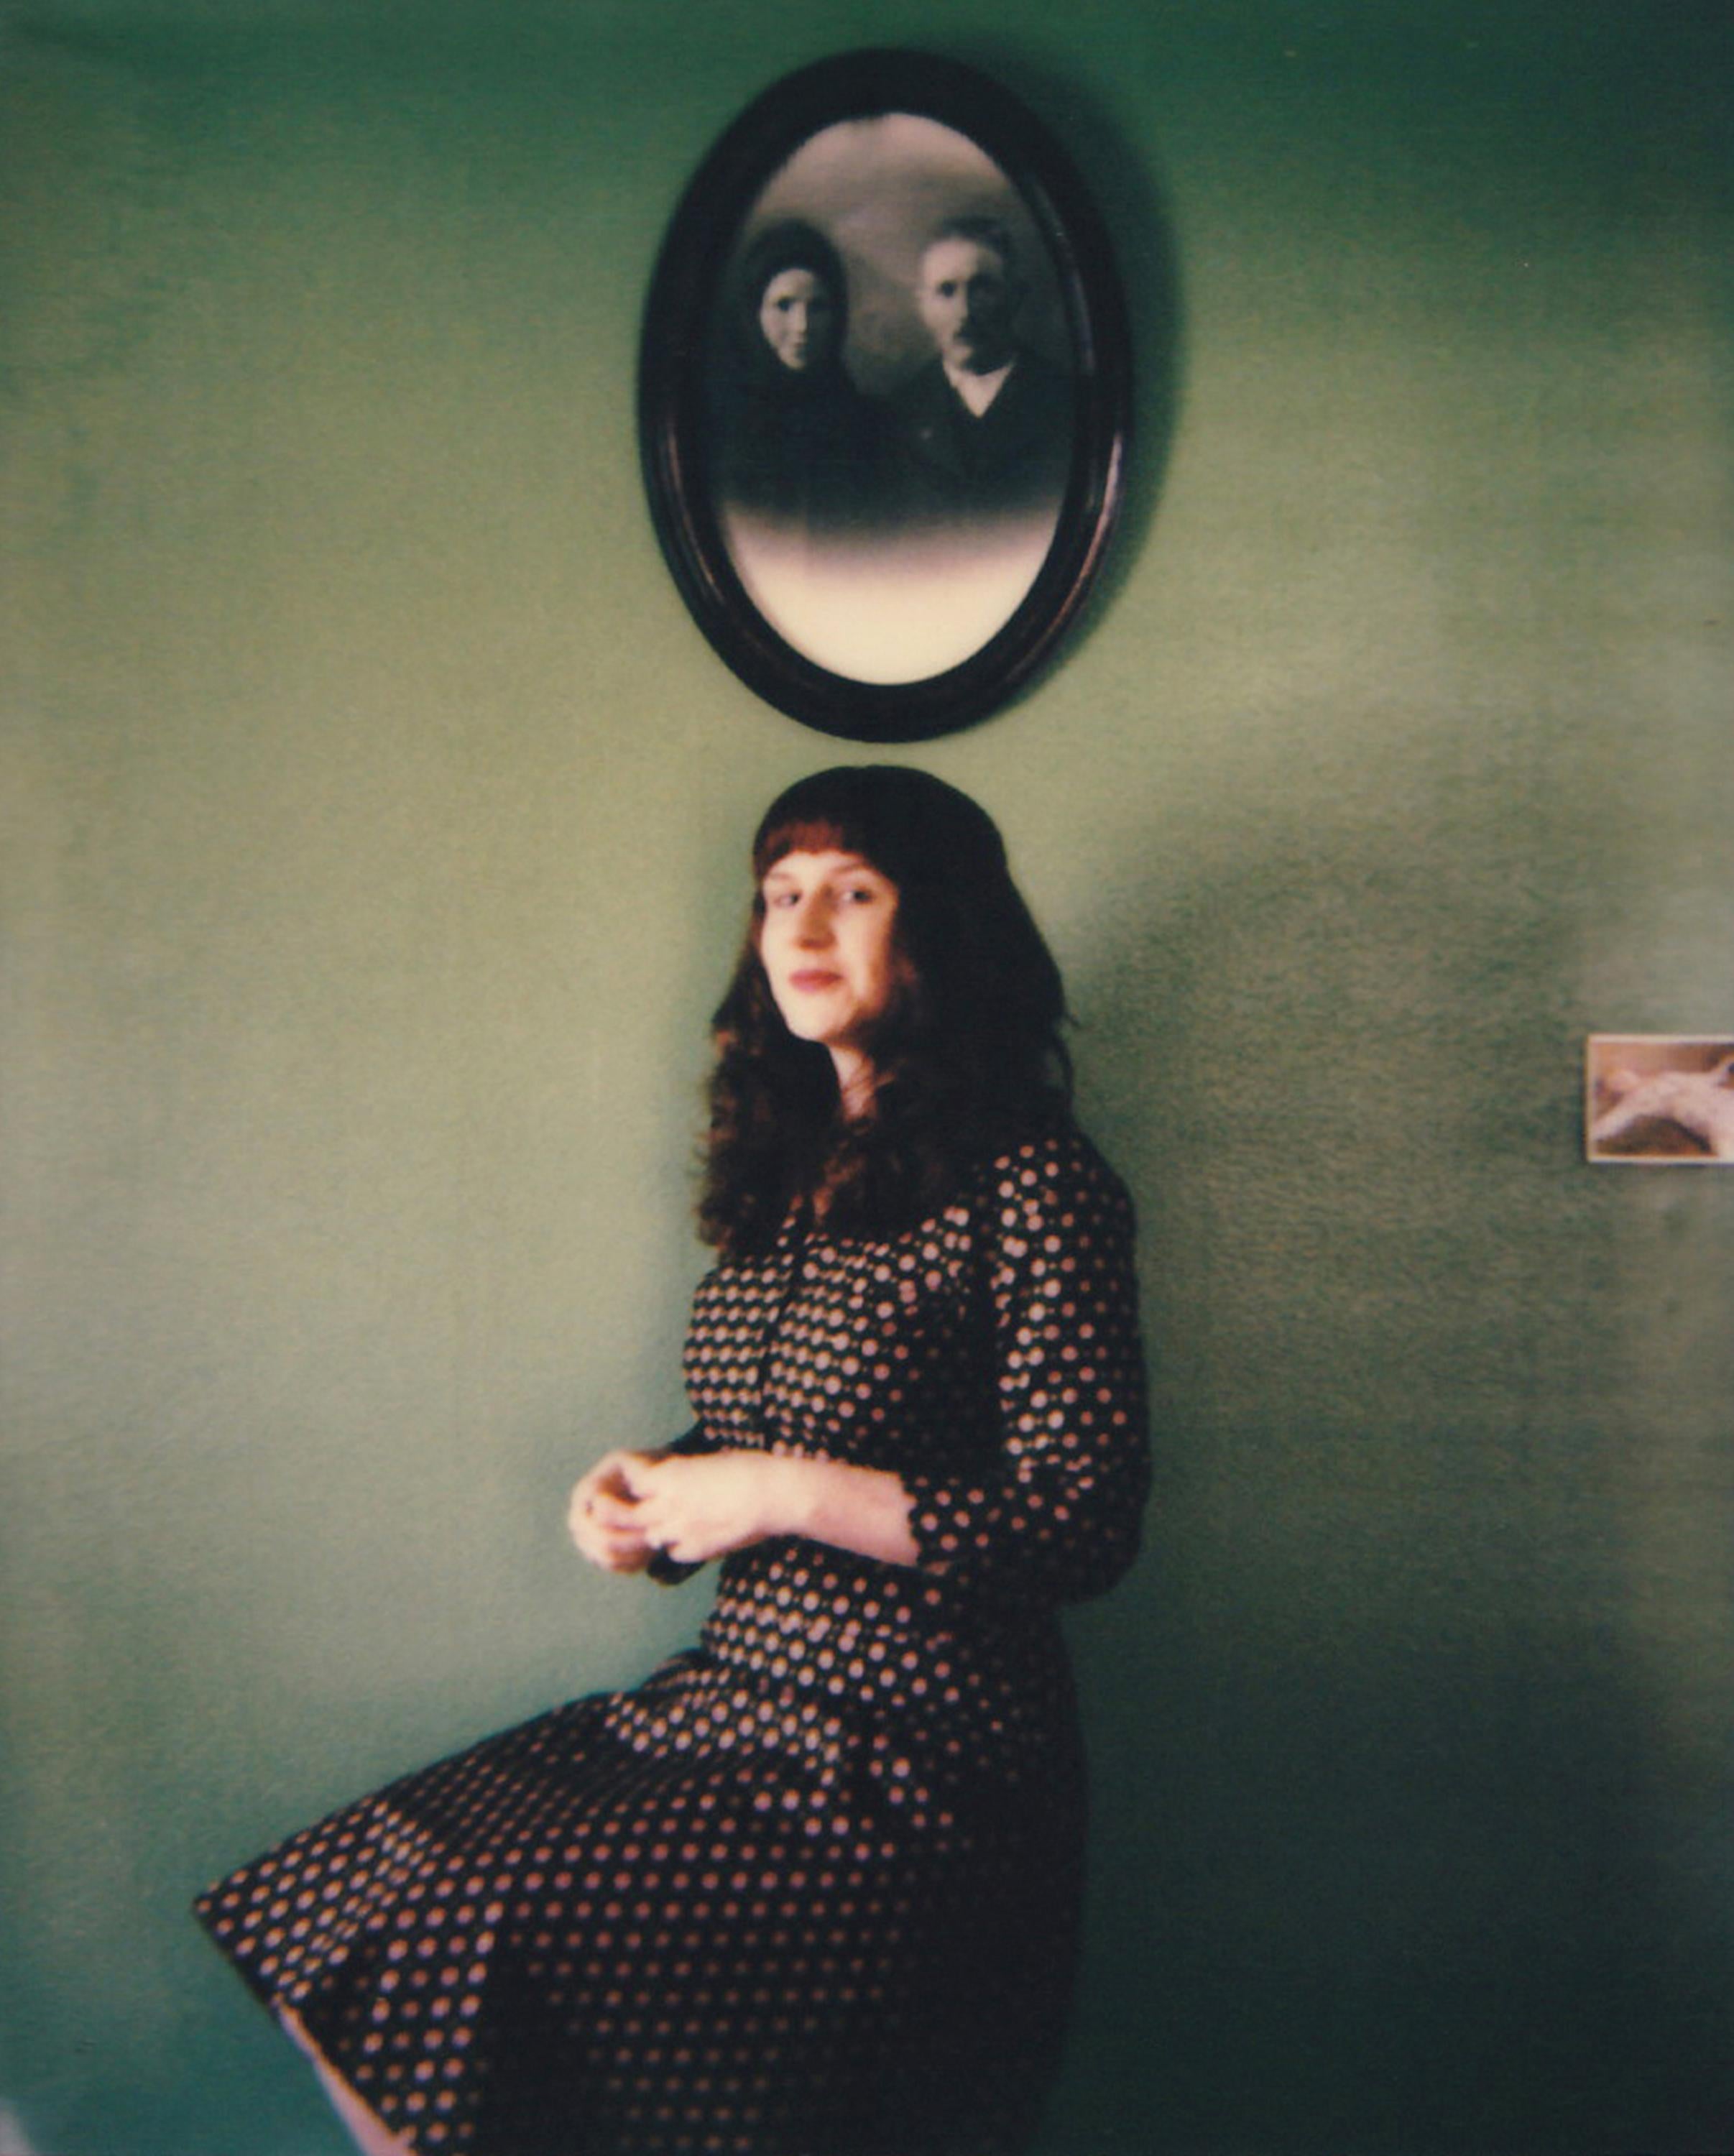 Self-portrait at the Green Wall - Contemporary, Woman, Polaroid, 21st Century